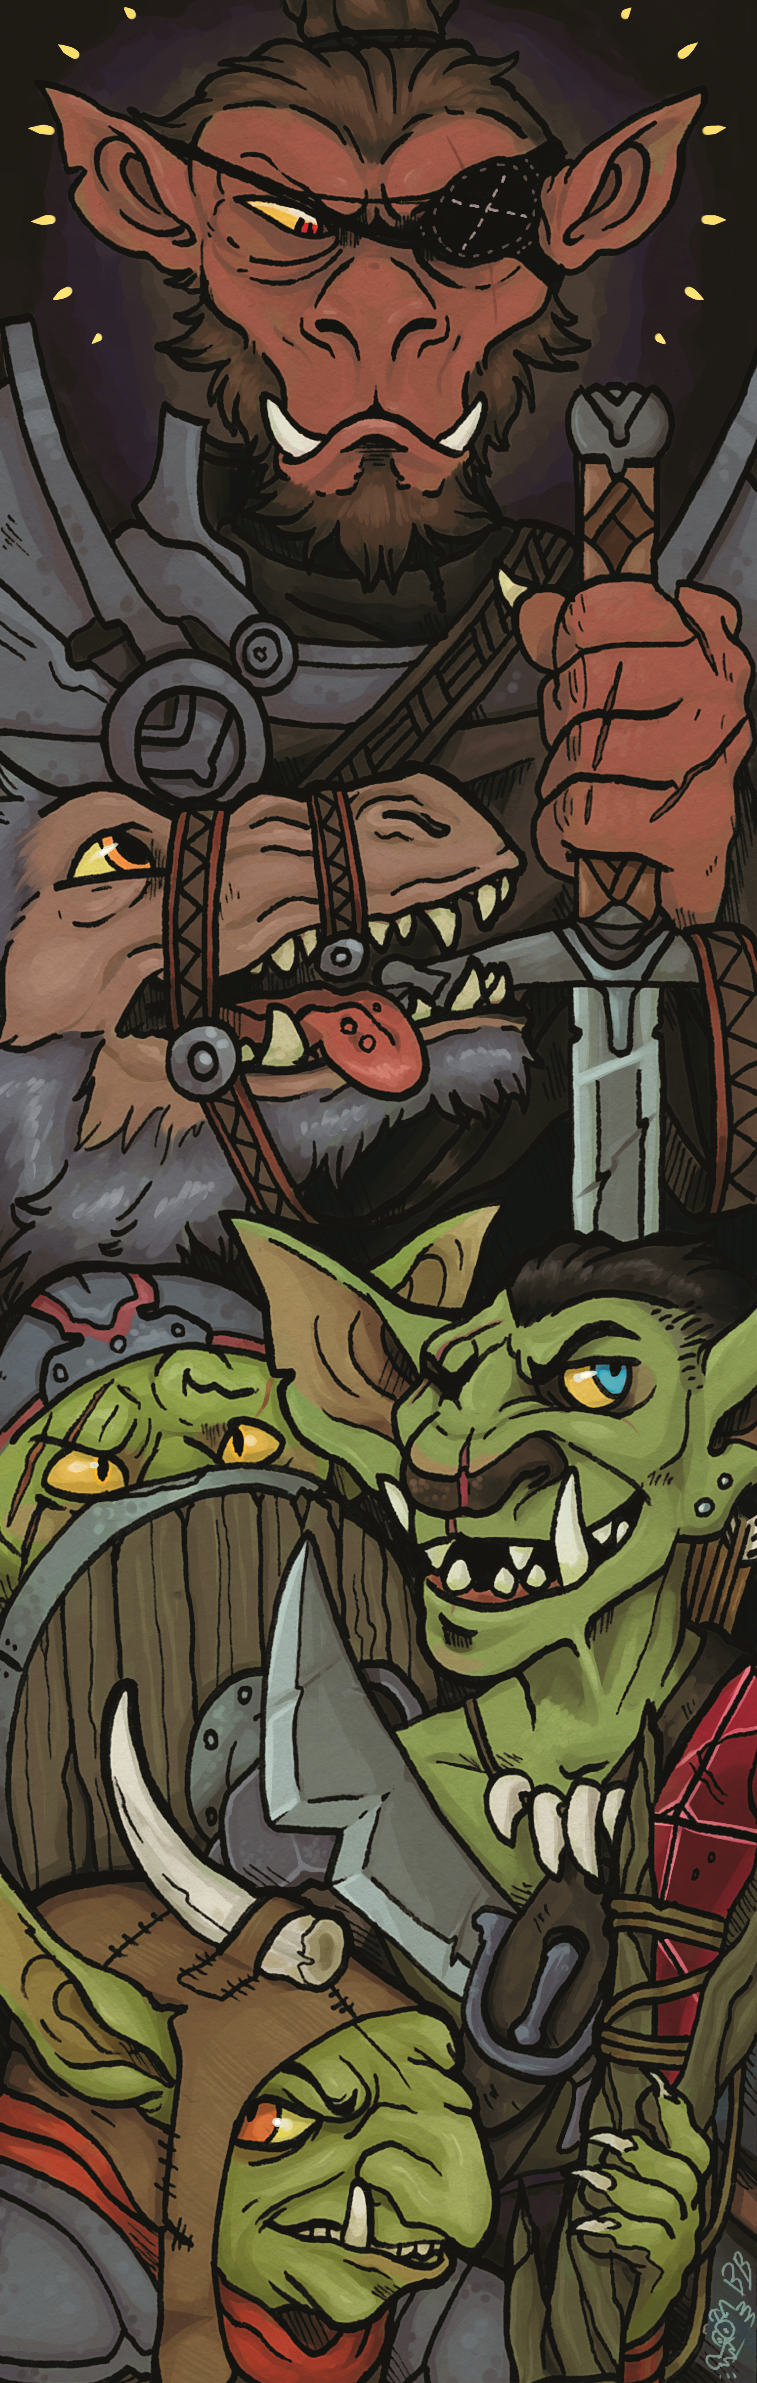 Image. A collection of scrunkly goblins, with weapons and armour. They also have an adoring, slobbery worg.